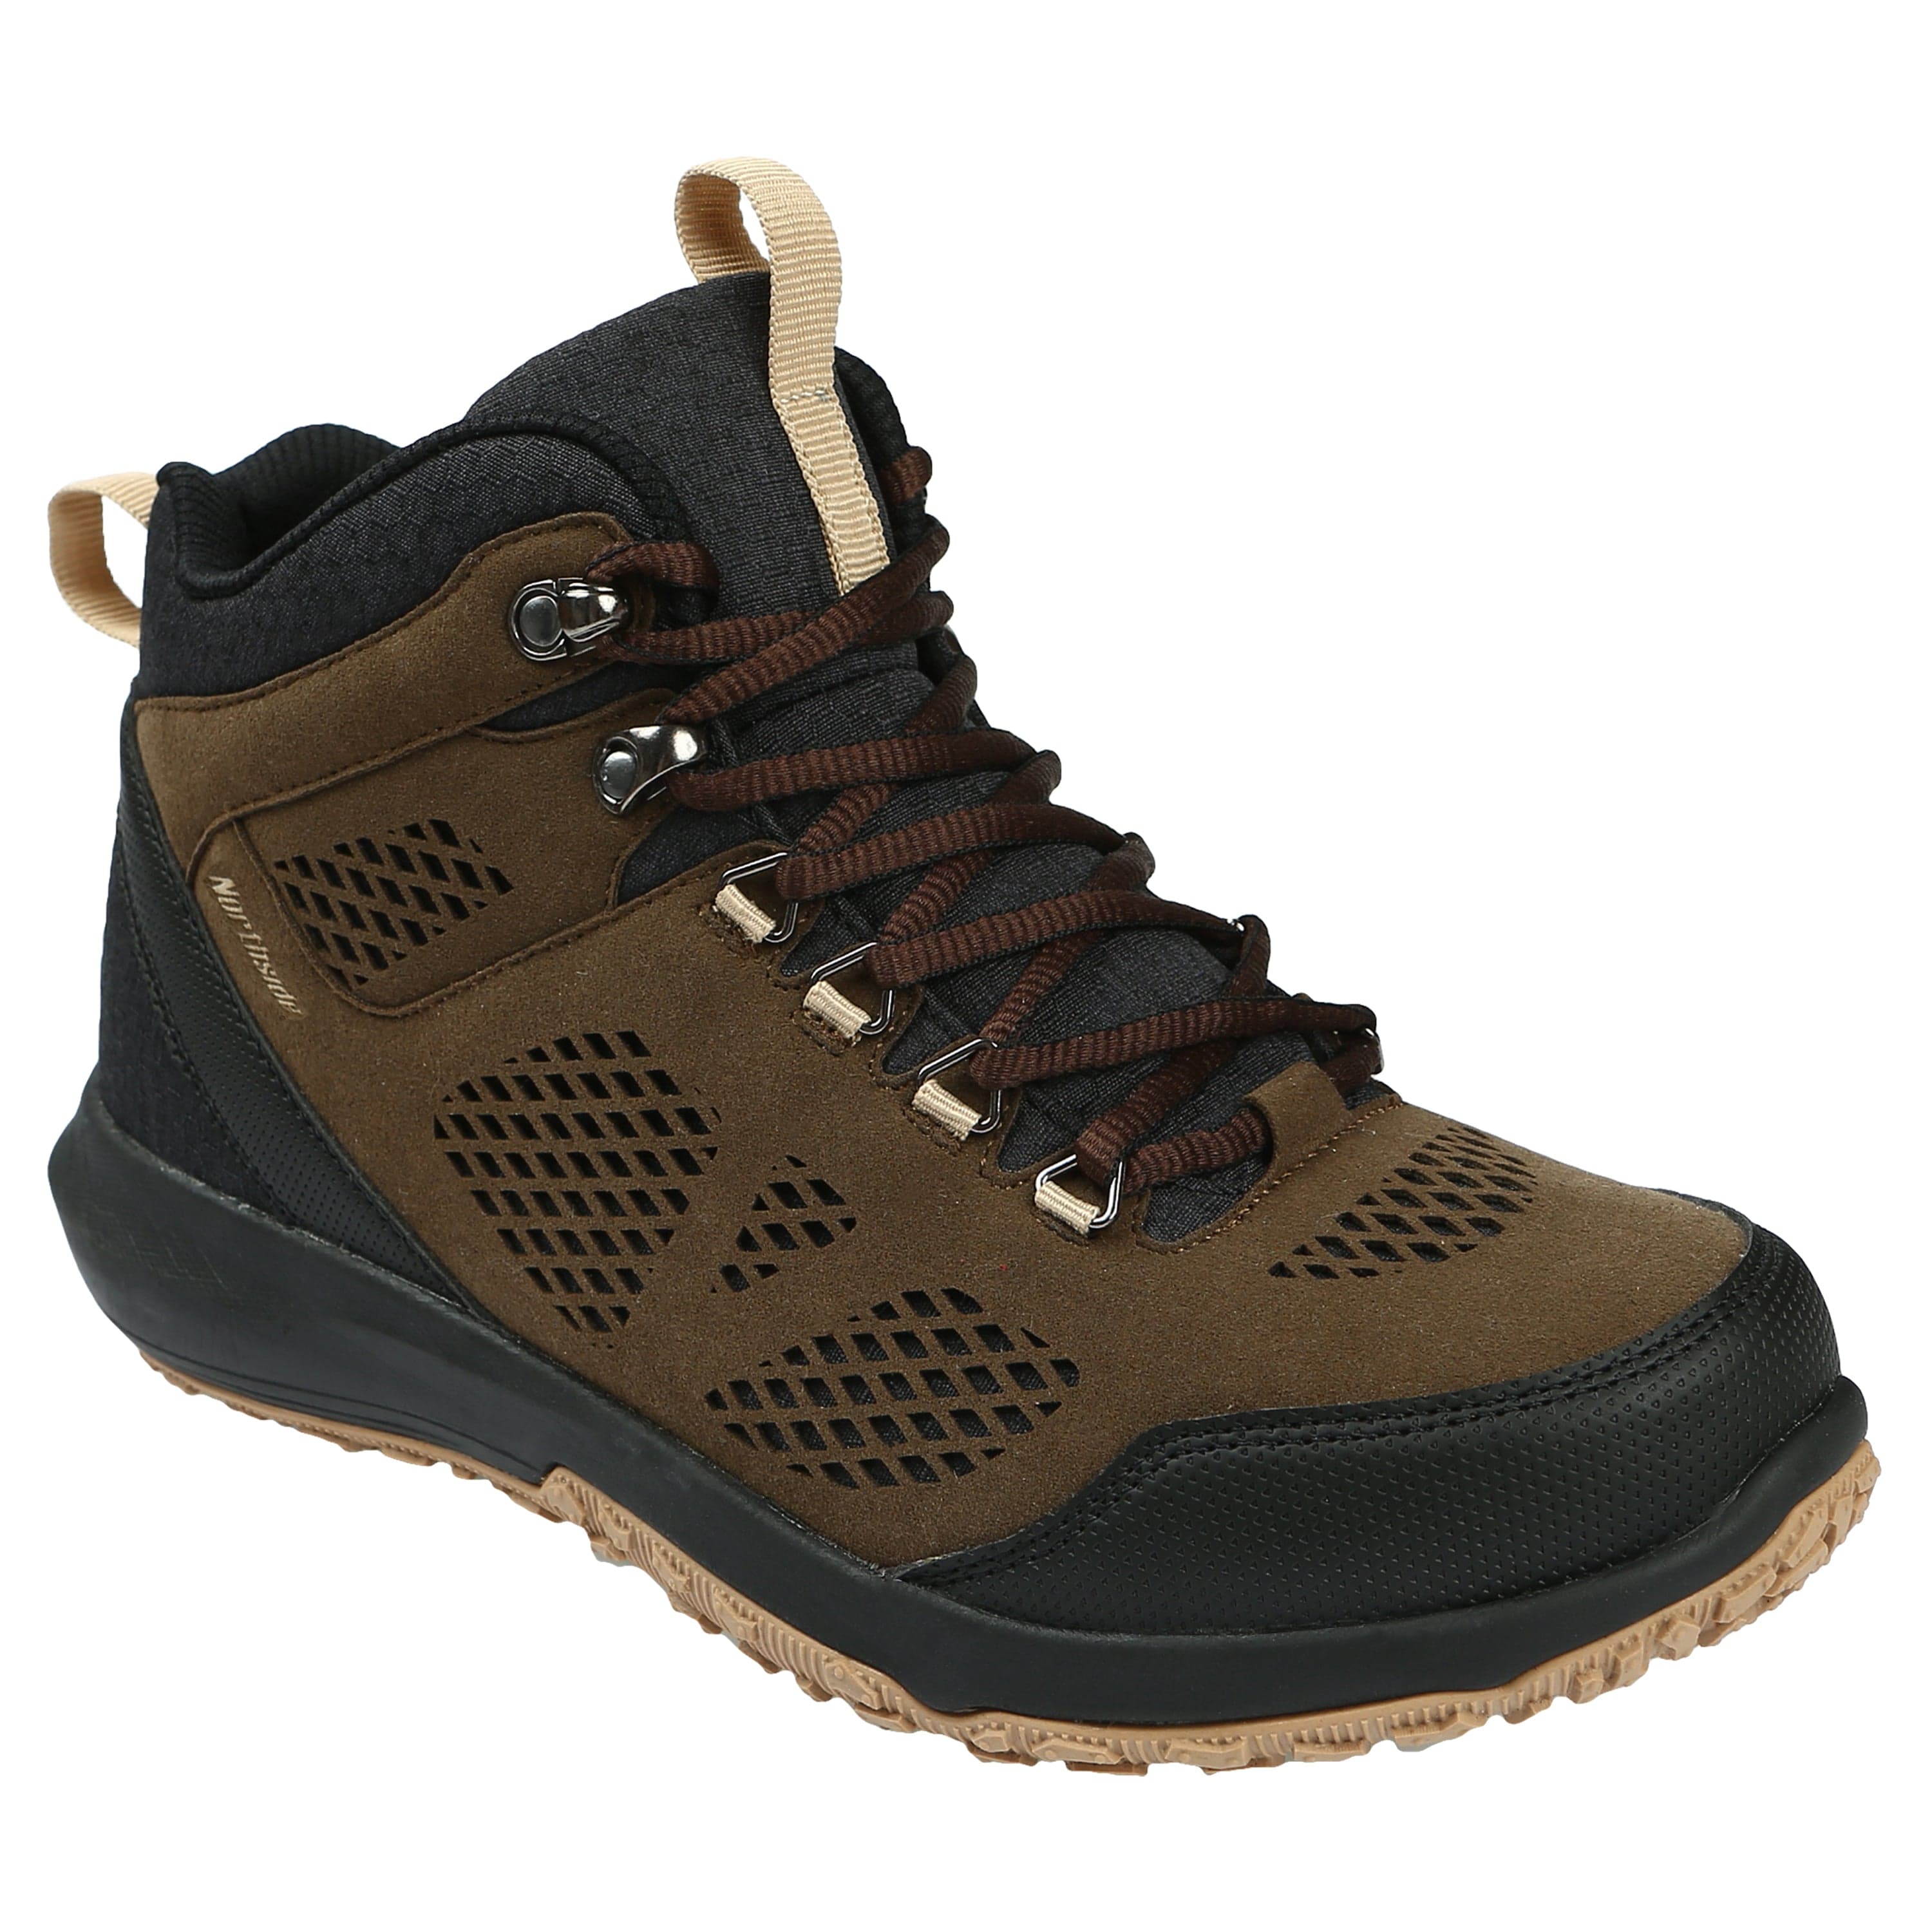 Northside Men's Arlow Canyon Mid Hiking Boot